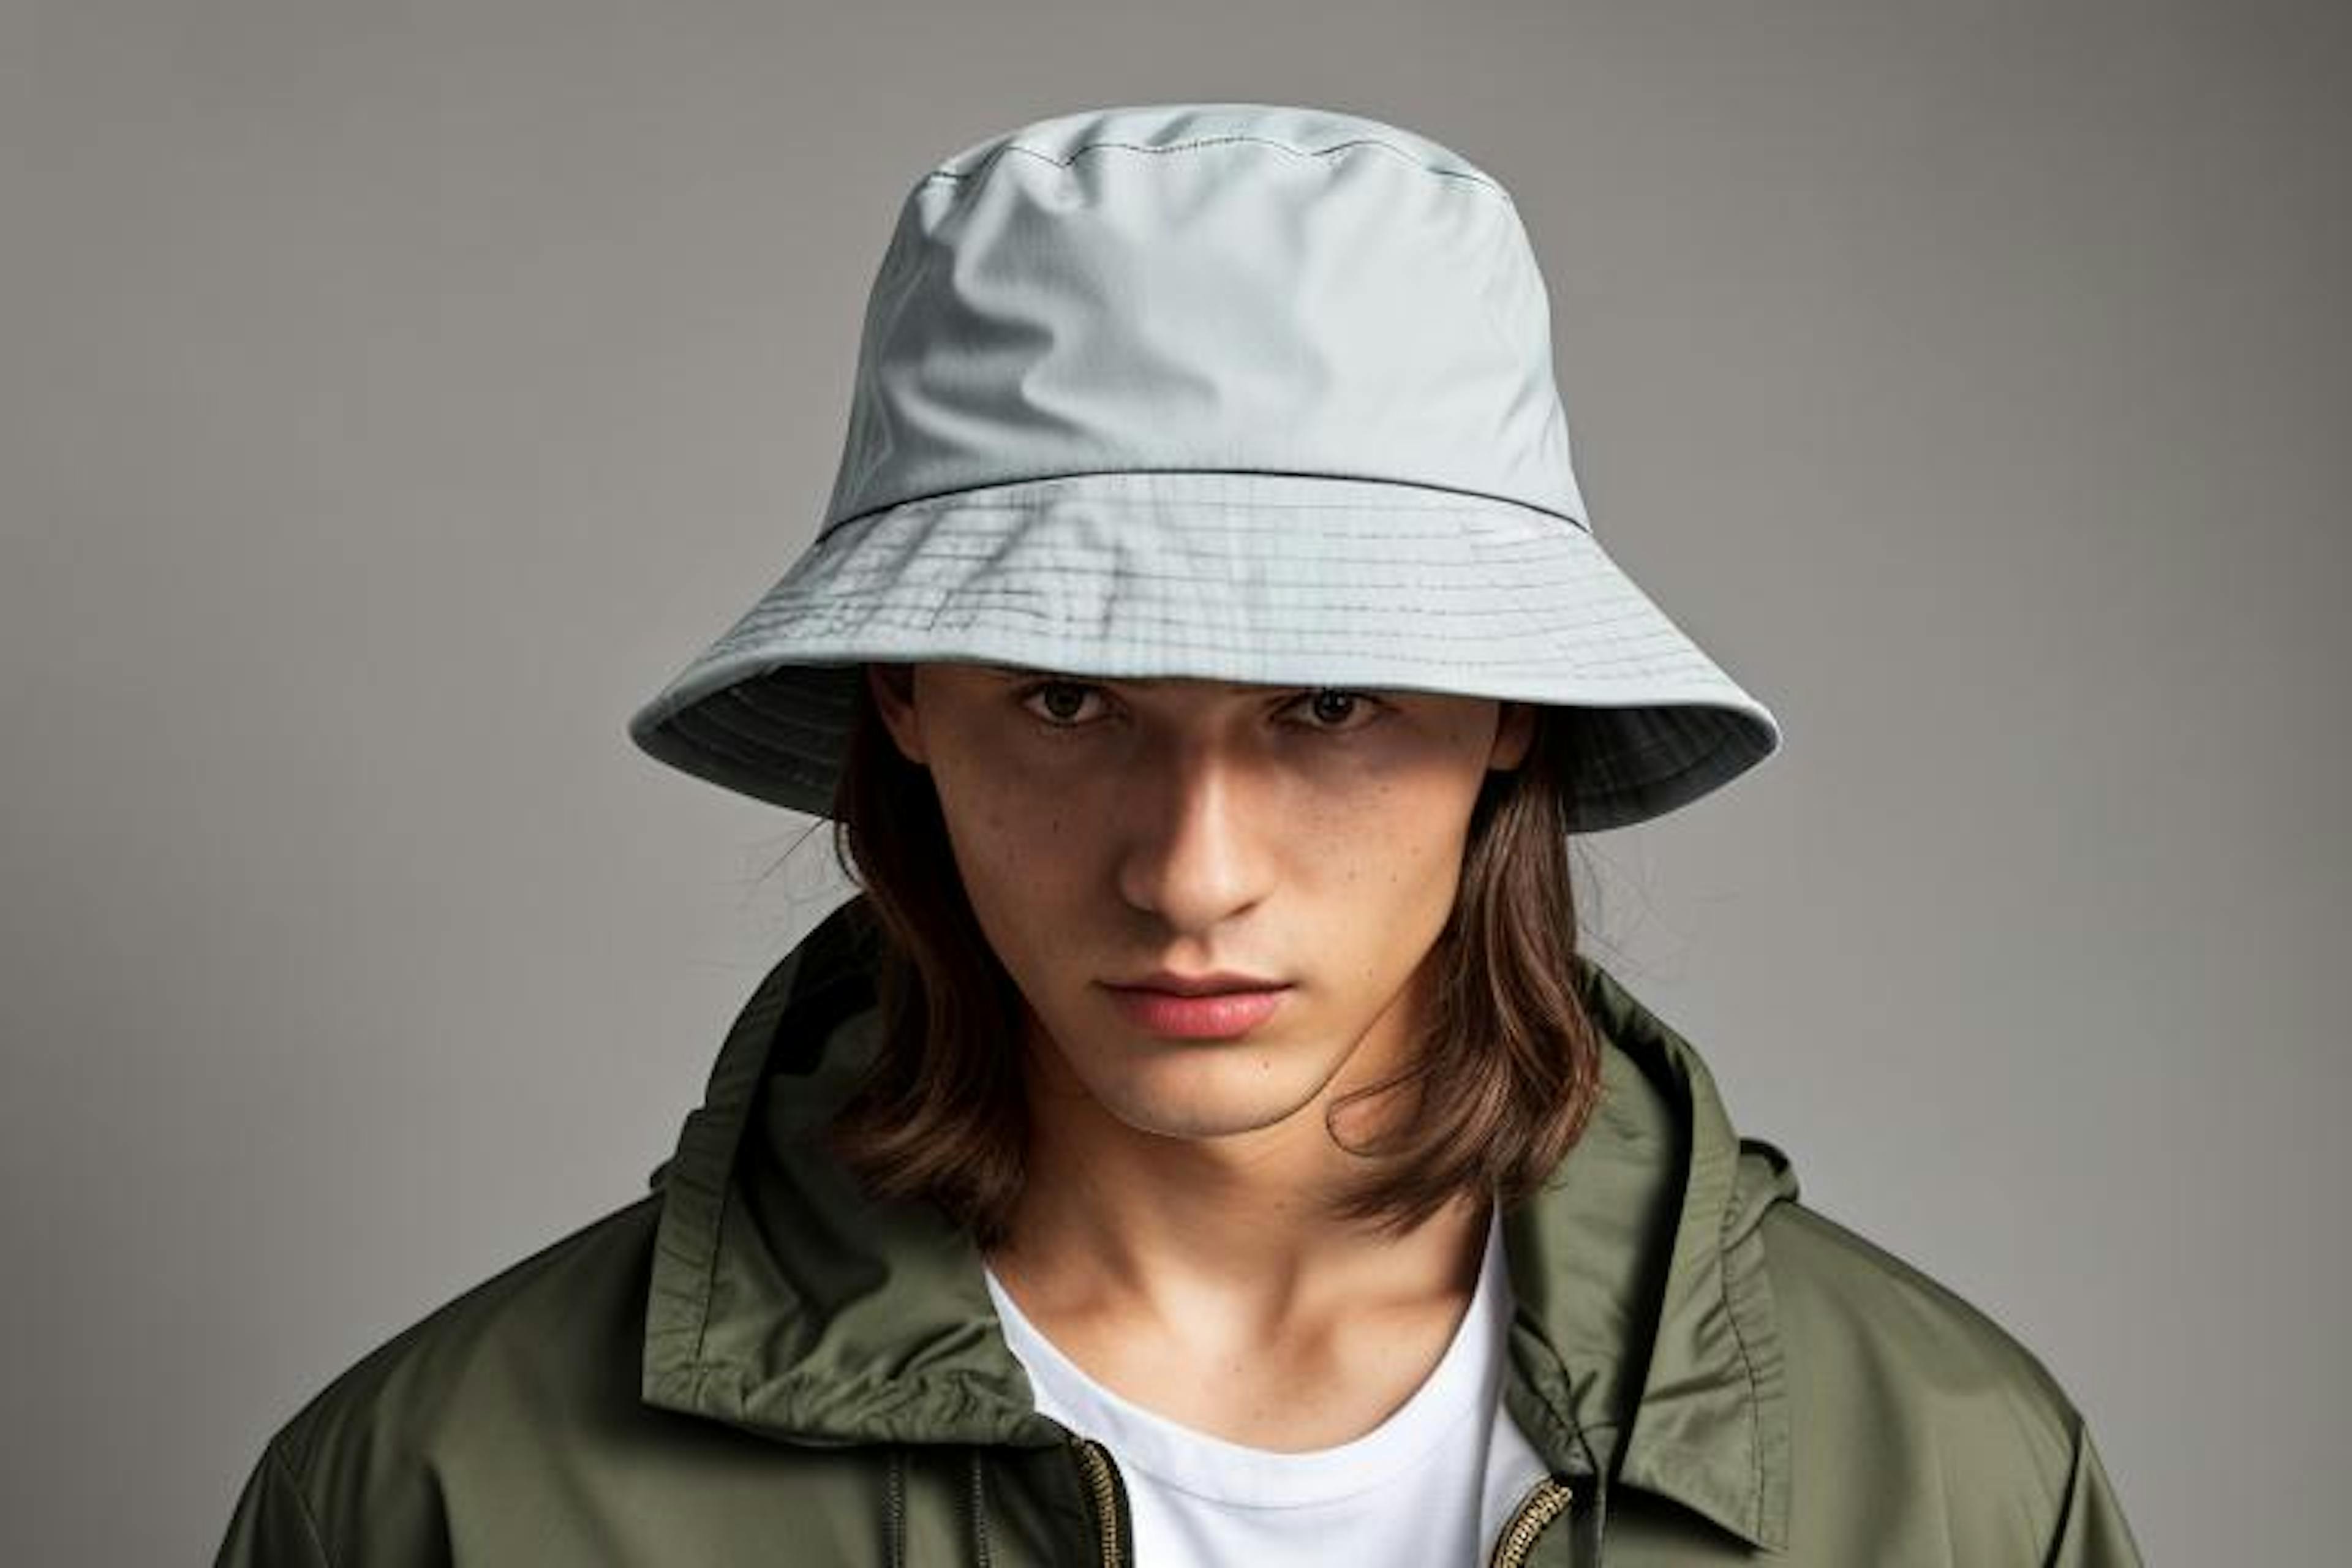 A man with long hair wearing a grey bucket hat